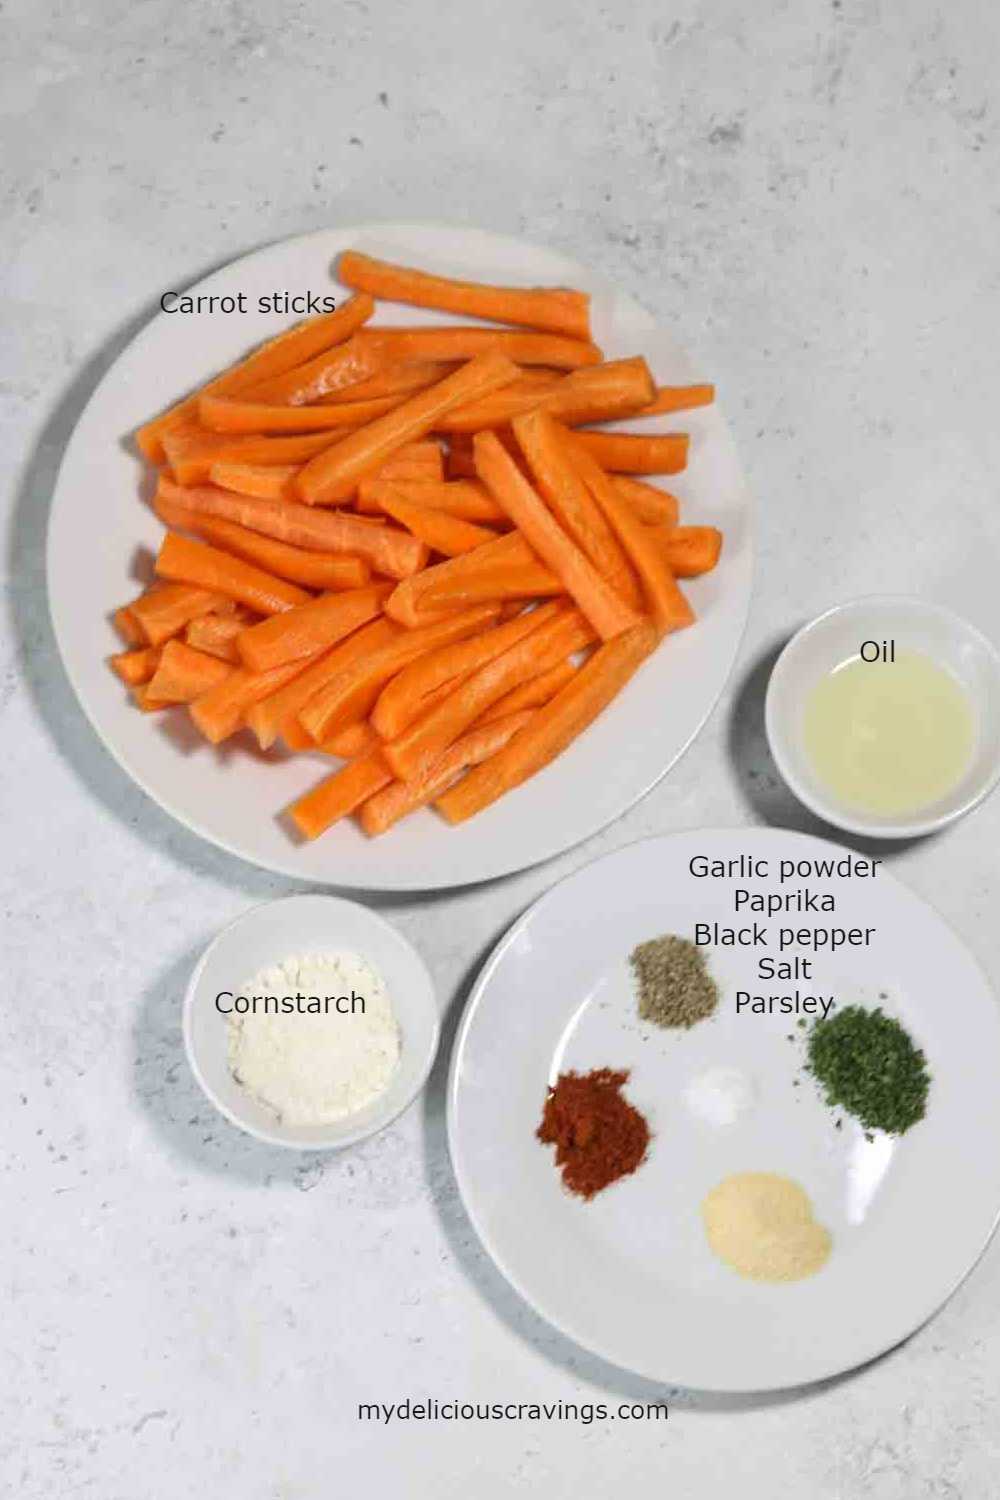 Ingredients you will need to make carrots fries.